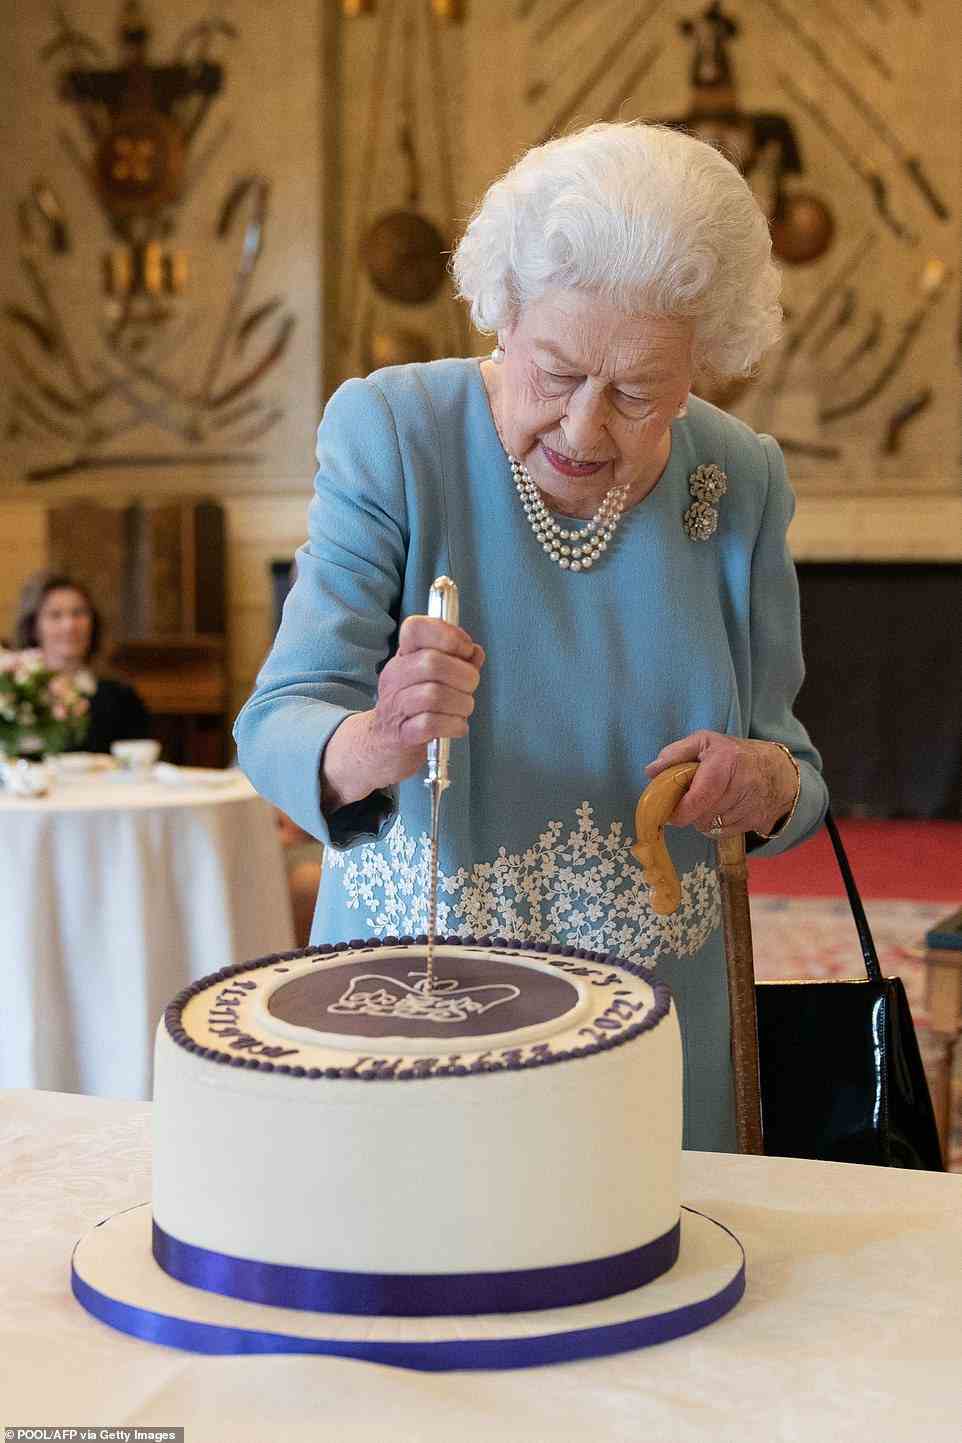 Celebrations for the Queen's Platinum Jubilee will include the Red Arrows performing overhead at RAF Cosford, jousting at Hampton Court Palace and Sir Elton John performing at a special concert at Buckingham Palace. Pictured: The Queen cuts a cake to celebrate the start of the Platinum Jubilee on February 5 2022